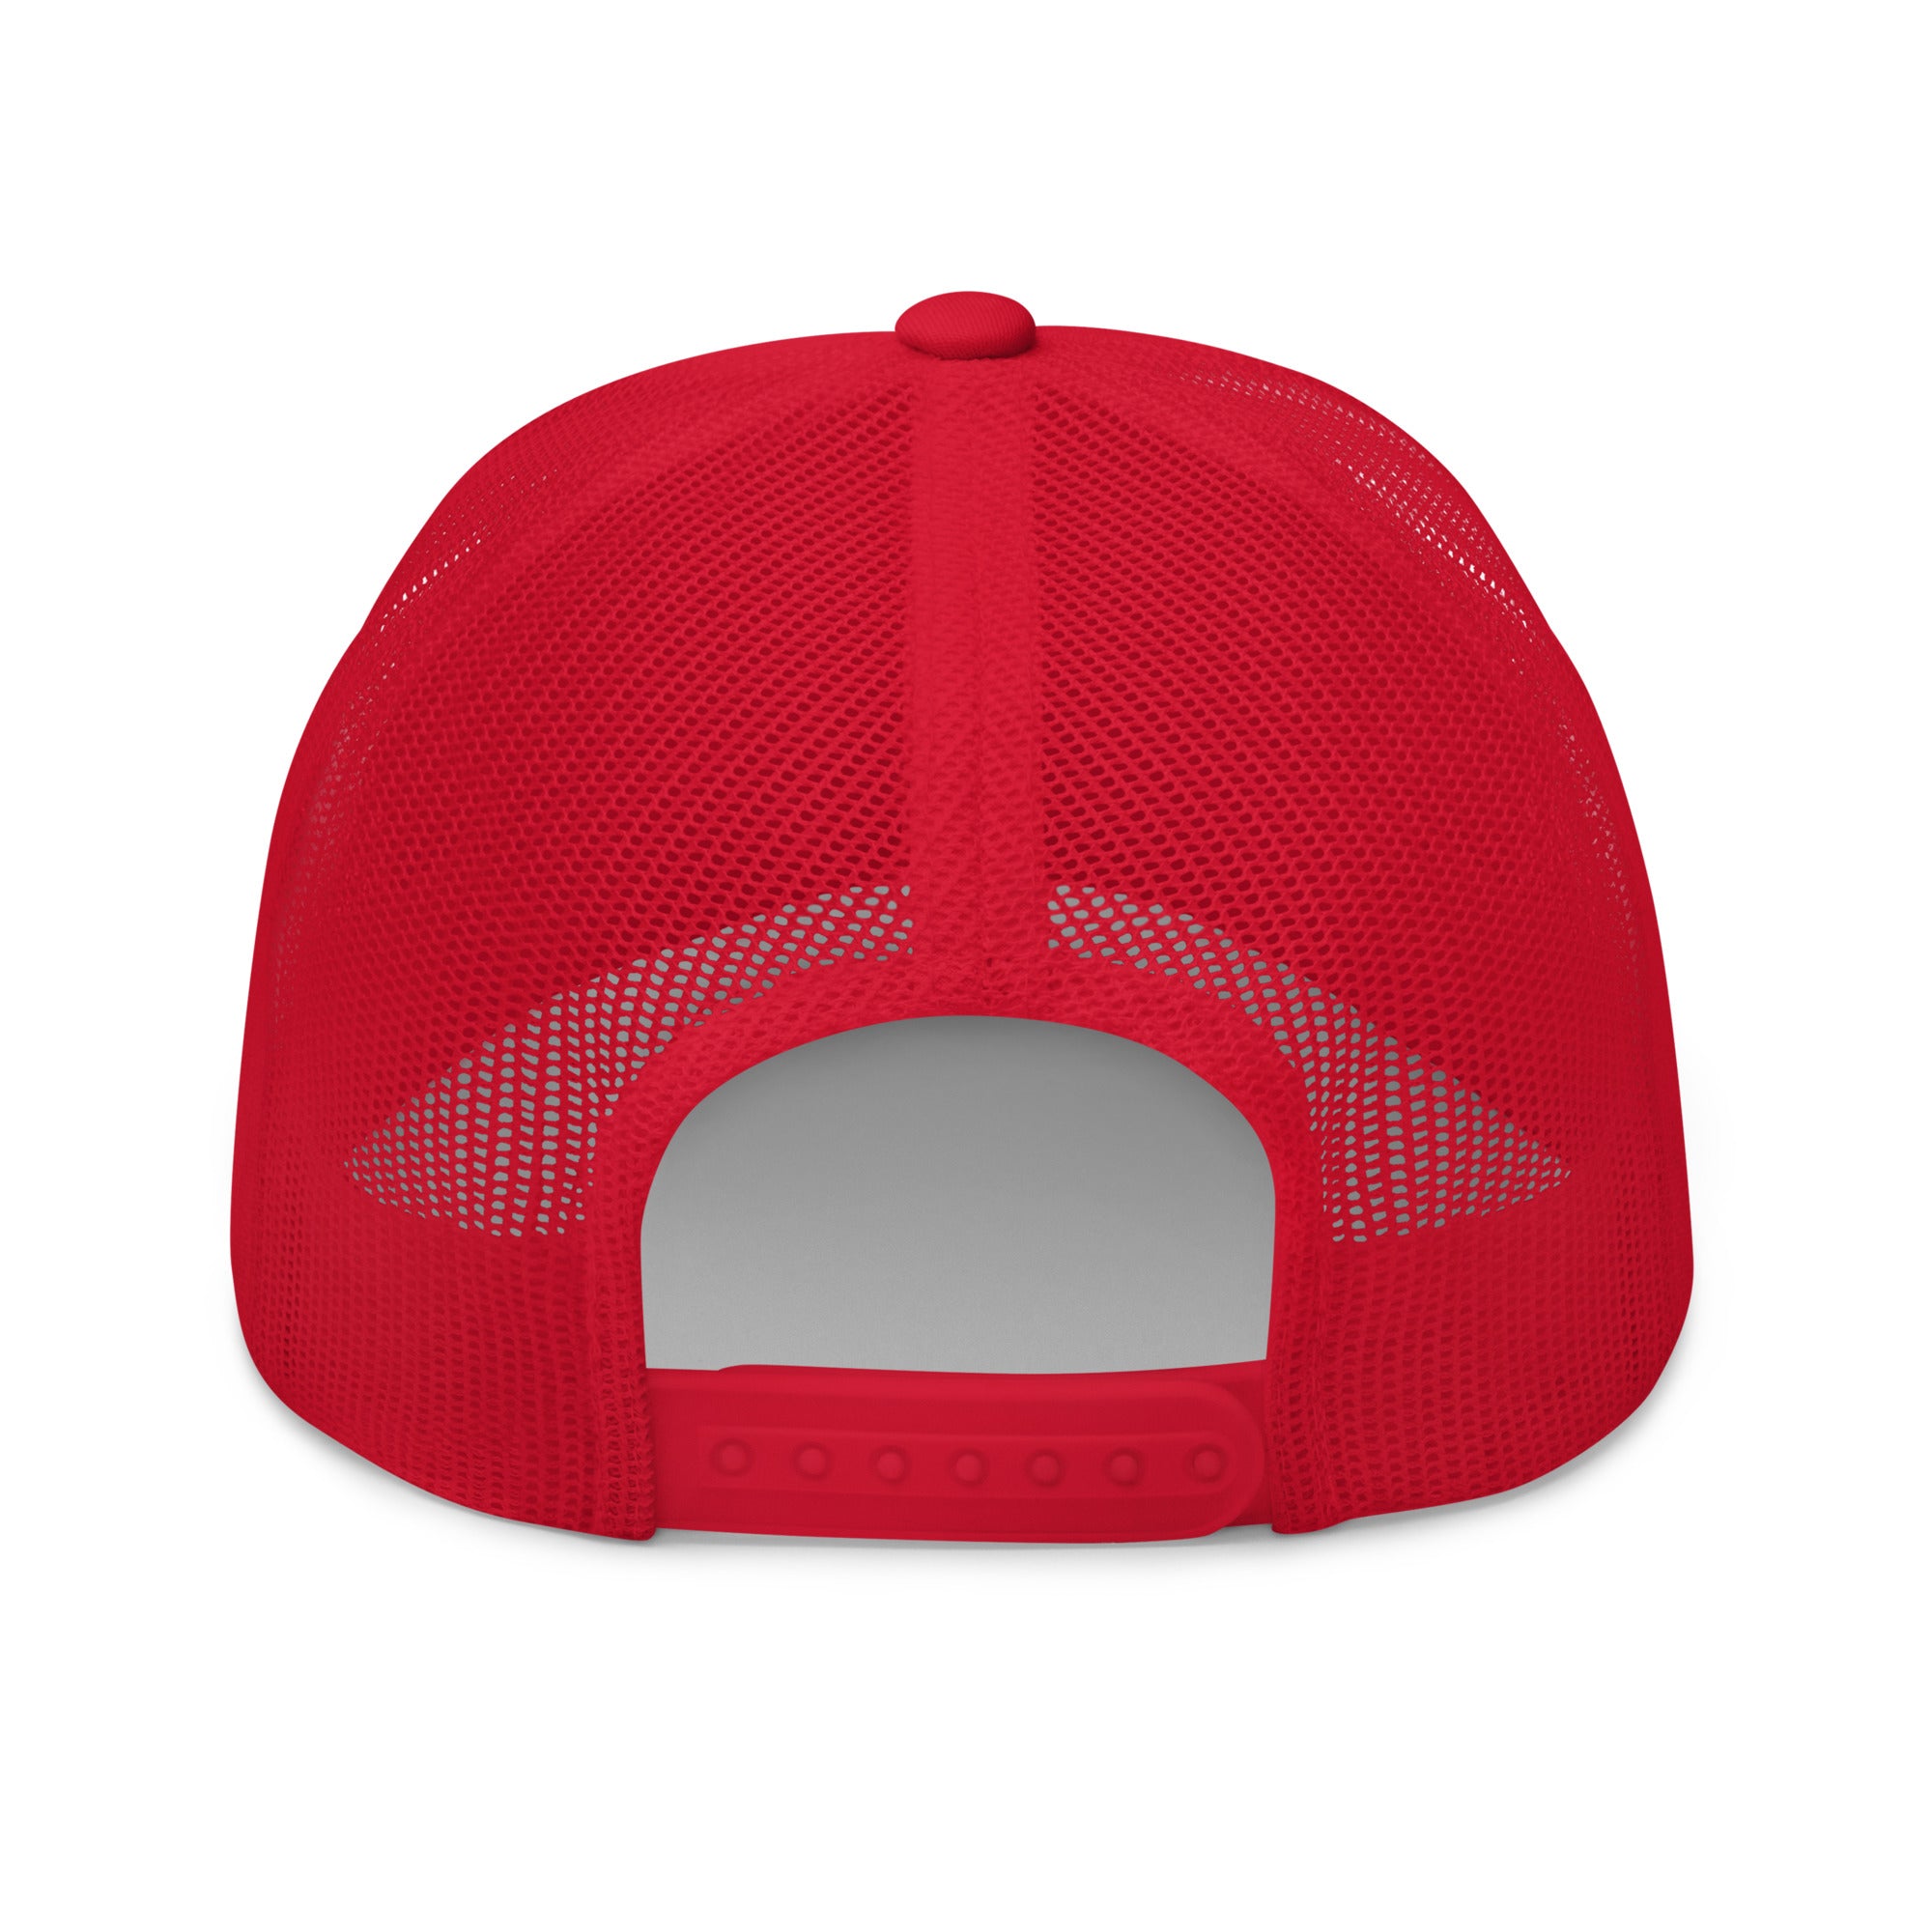 Bitcoin Merch - The Bitcoin Dominance Trucker Hat has mesh back panels and a snapback closure. Back view.